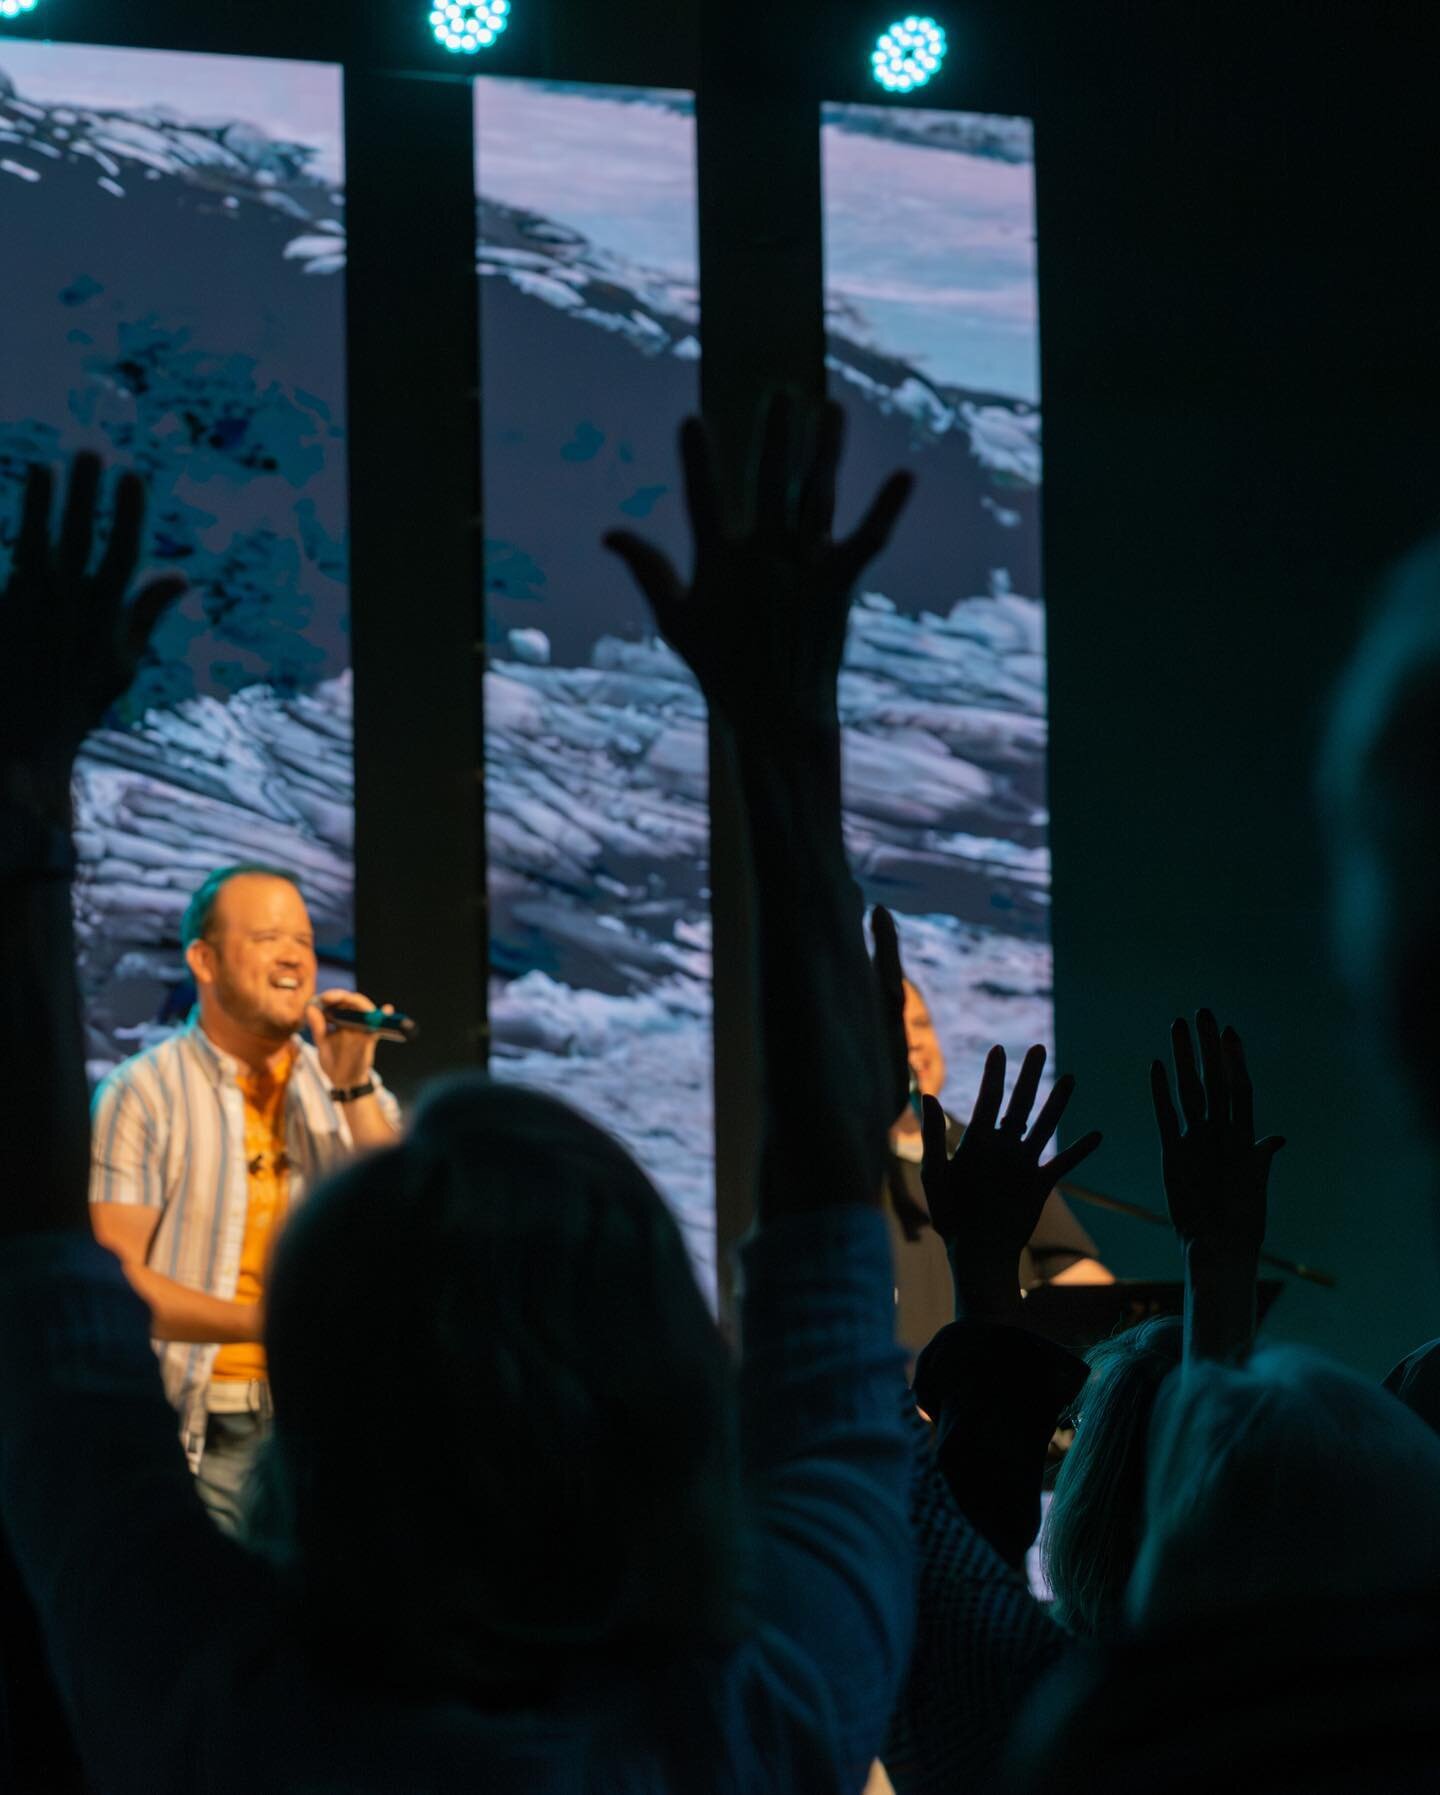 WHAT. A. MORNING. We celebrated the grand reopening of our worship center and experienced God moving in this place today! Can we get a witness? 🙌